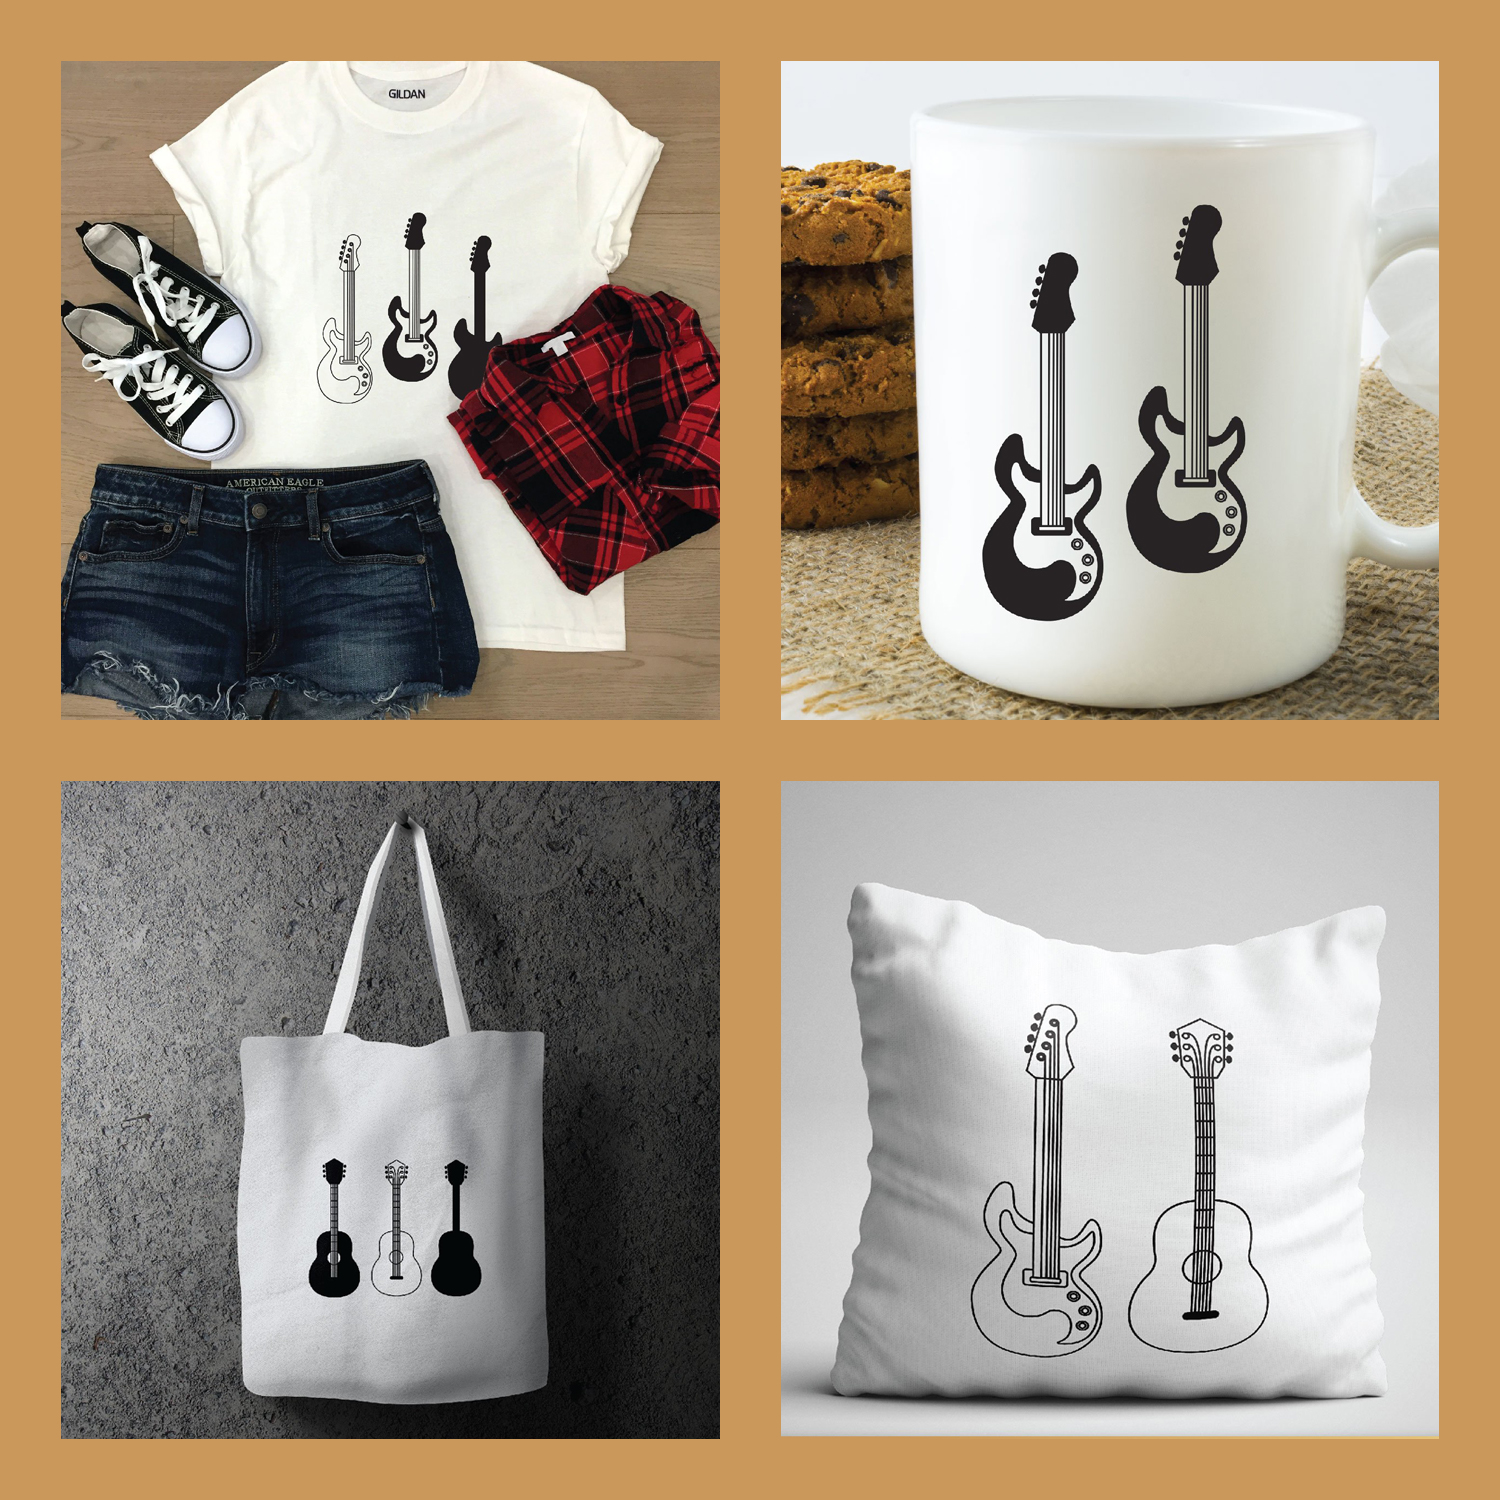 Unique prints with images of guitars on cups, tableware and clothes.